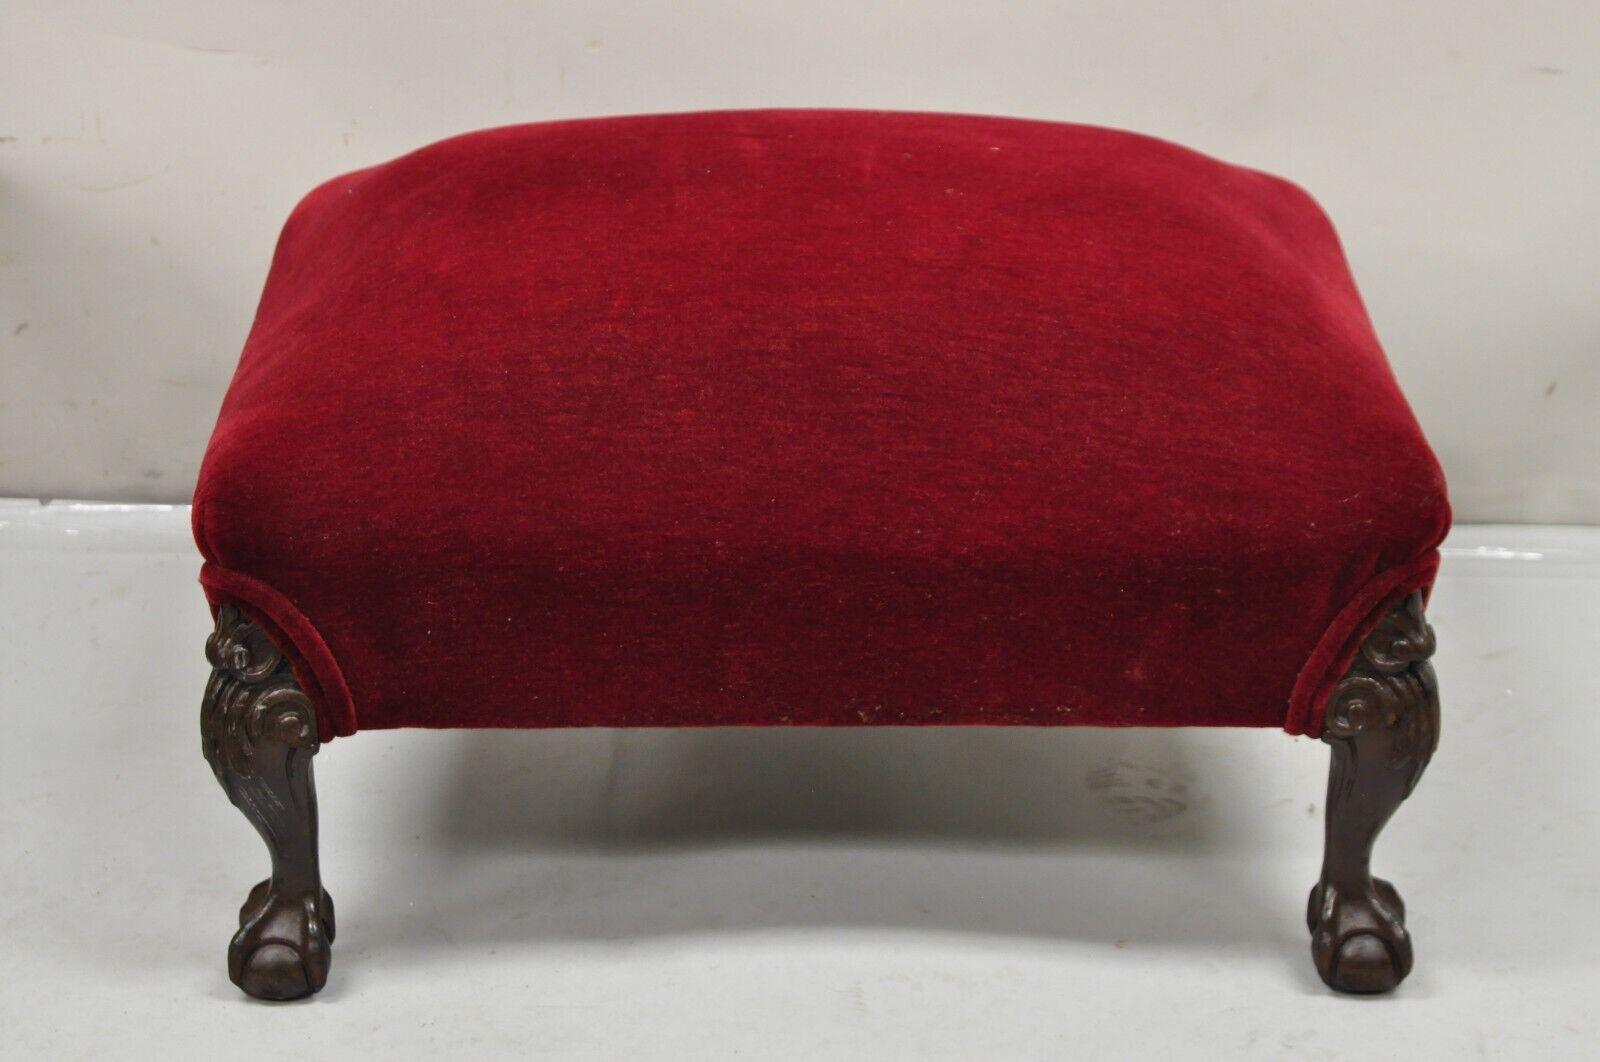 Antique Chippendale Style Mahogany Ball and Claw Carved Red Footstool Ottoman. item features red mohair upholstery, carved ball and claw feet, very nice antique item. Circa Early 20th Century. Measurements: 14